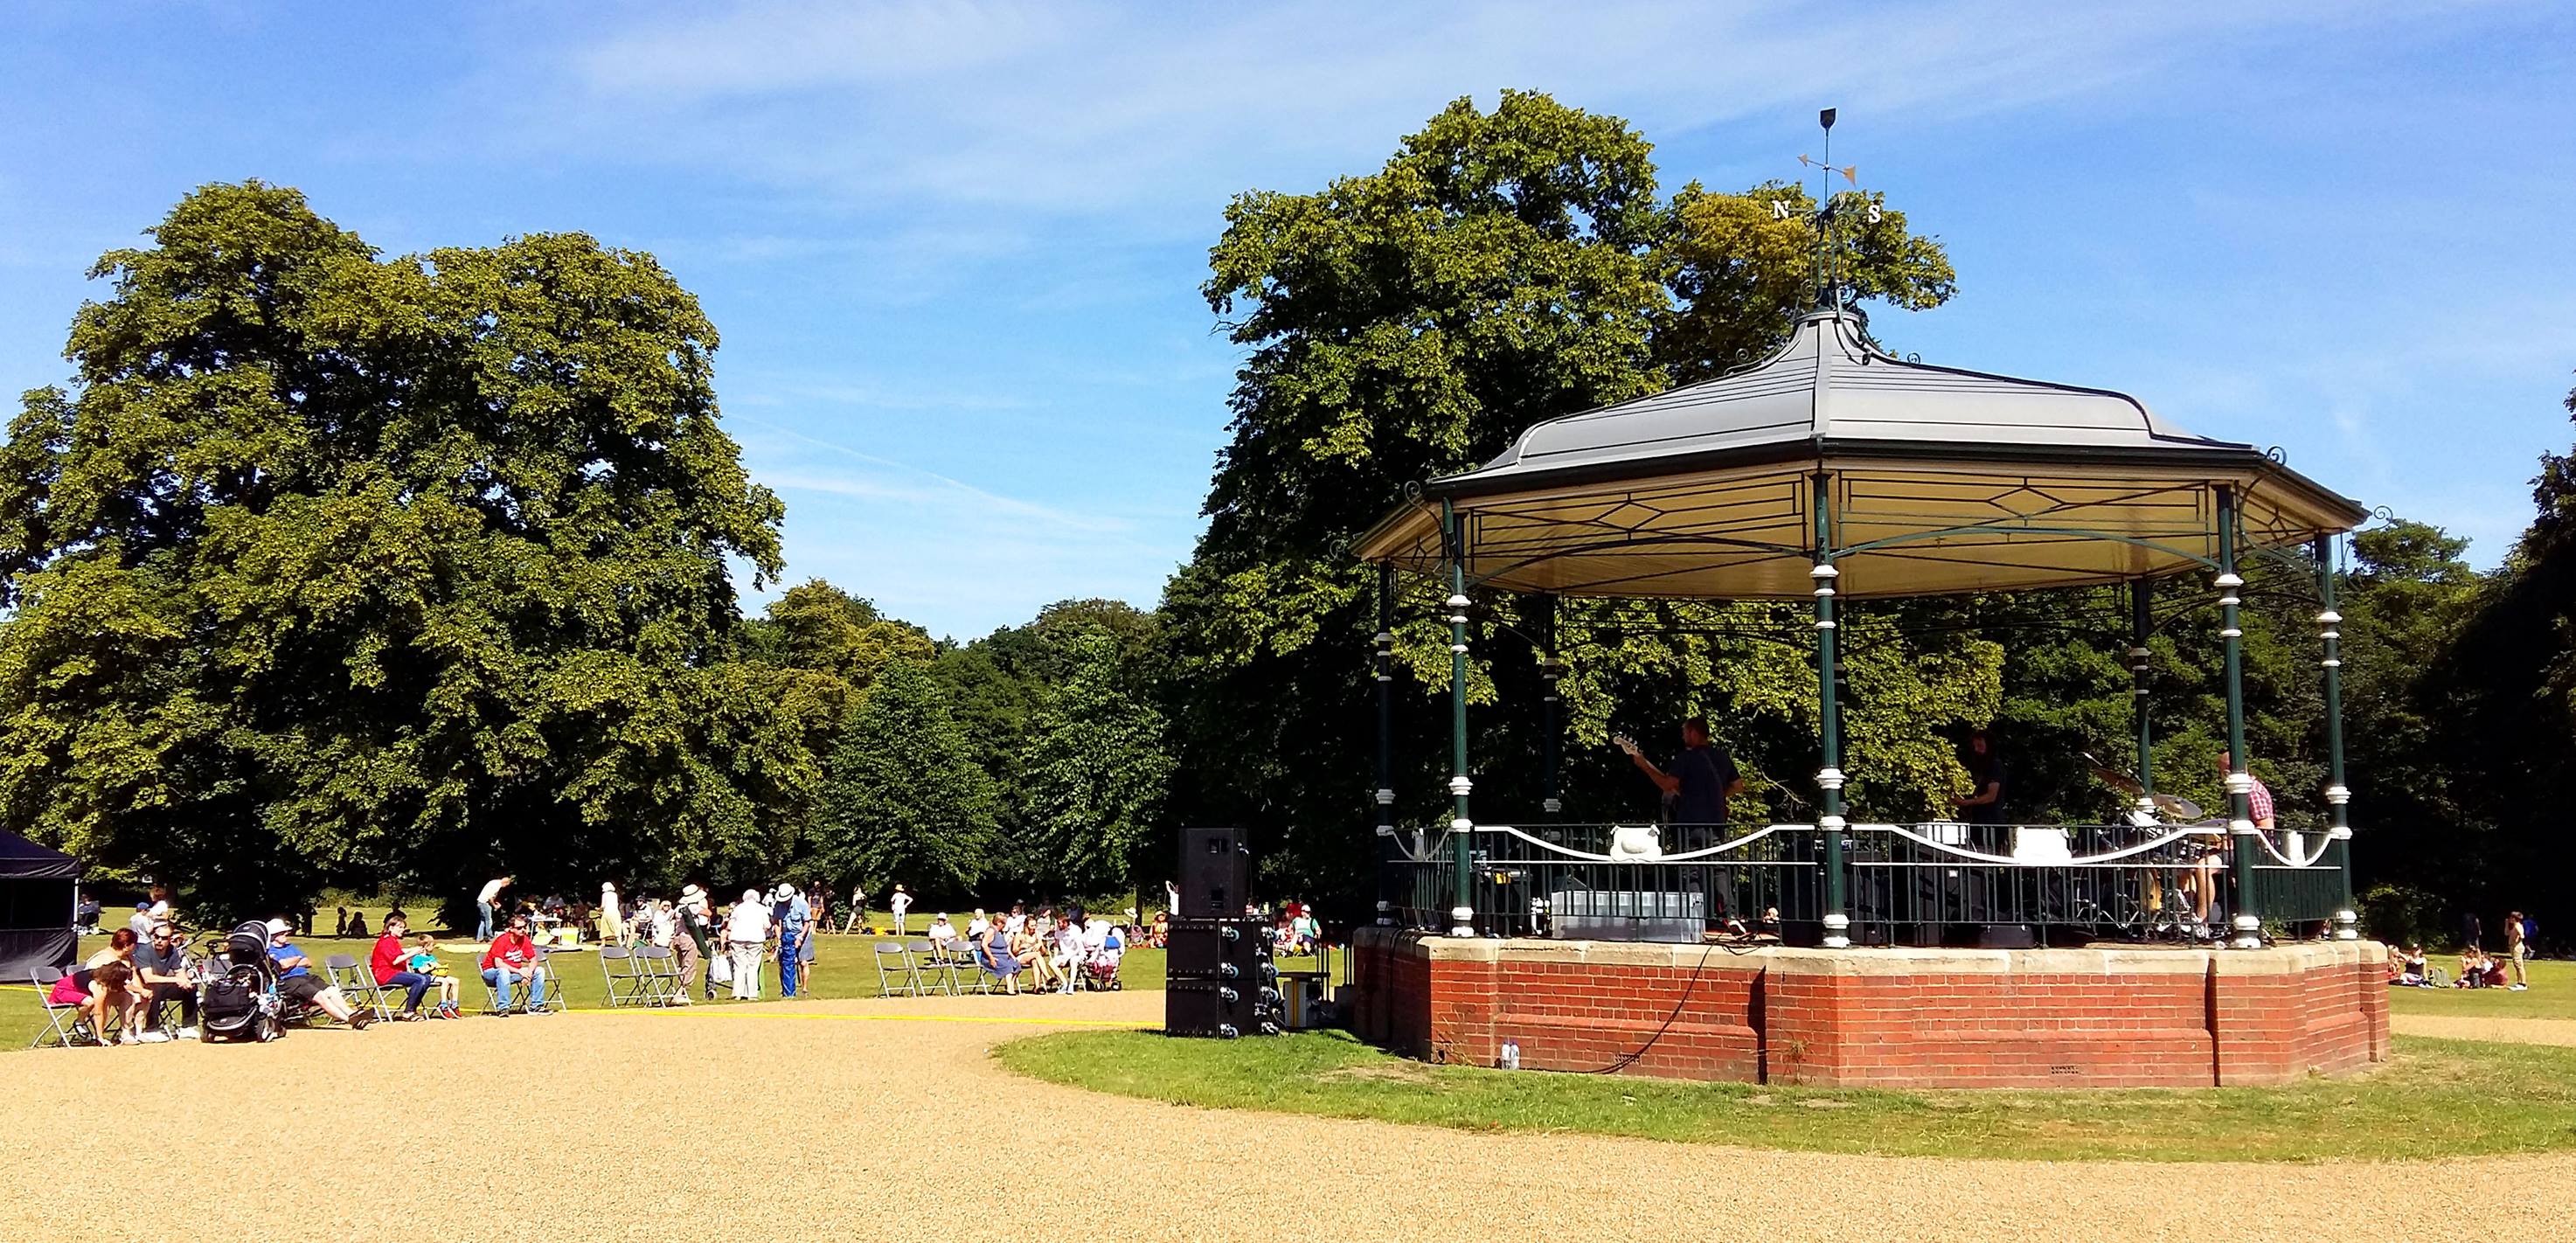 An image of the Grandstand at Boultham Park